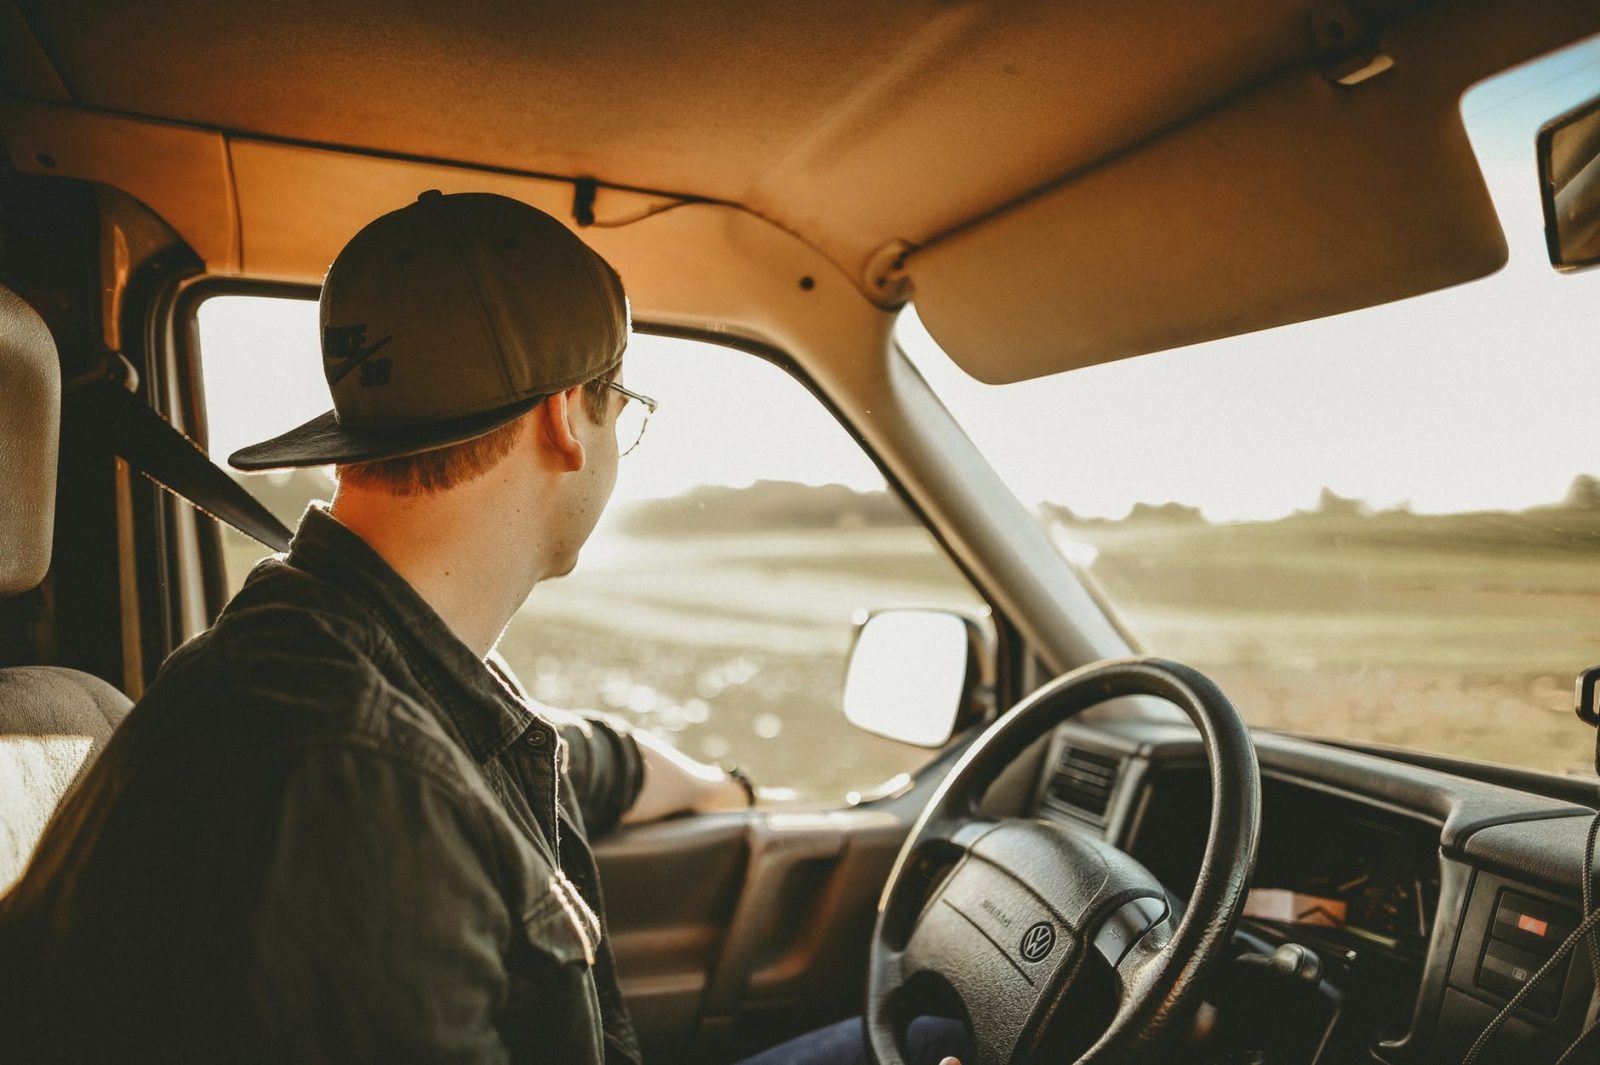 Becoming a Long-Term Truck Driver What Does the Future Hold